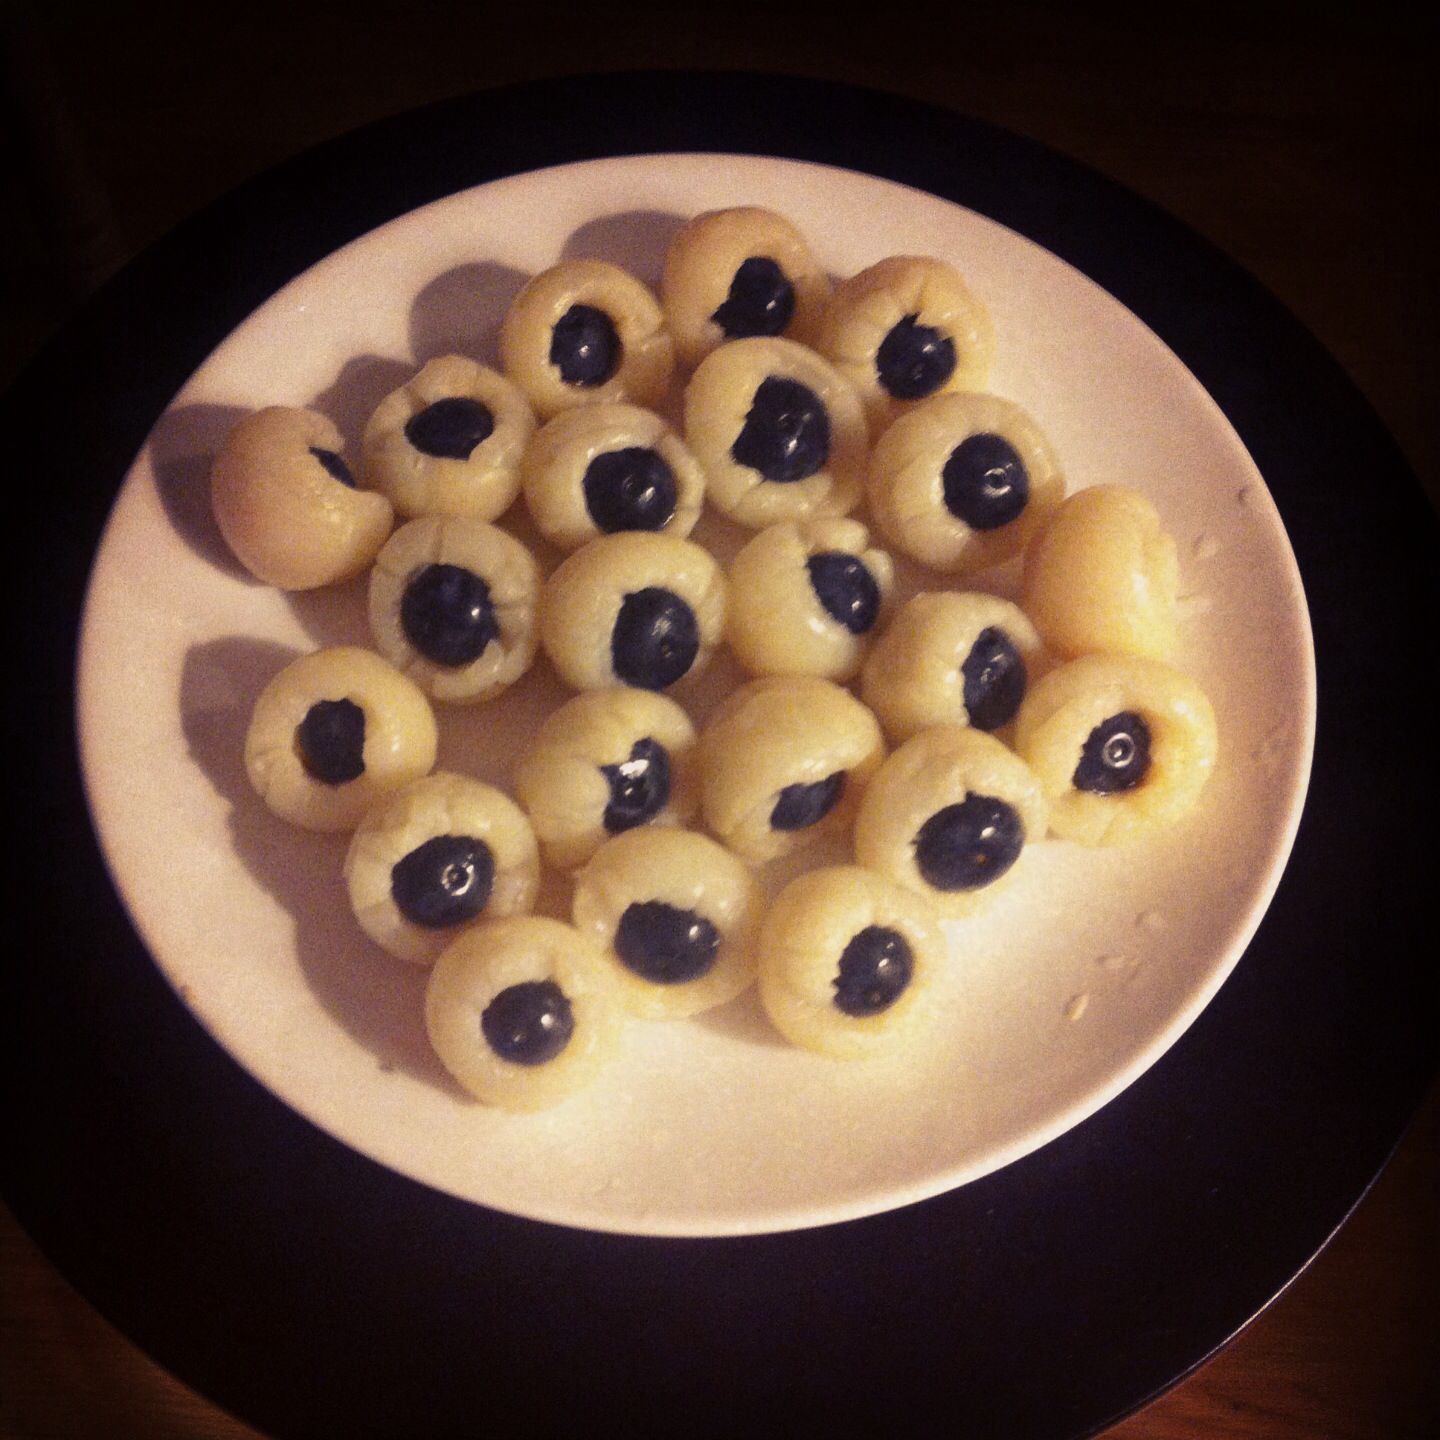 Lychees and blueberries = googly eyes for Halloween | Food for ...